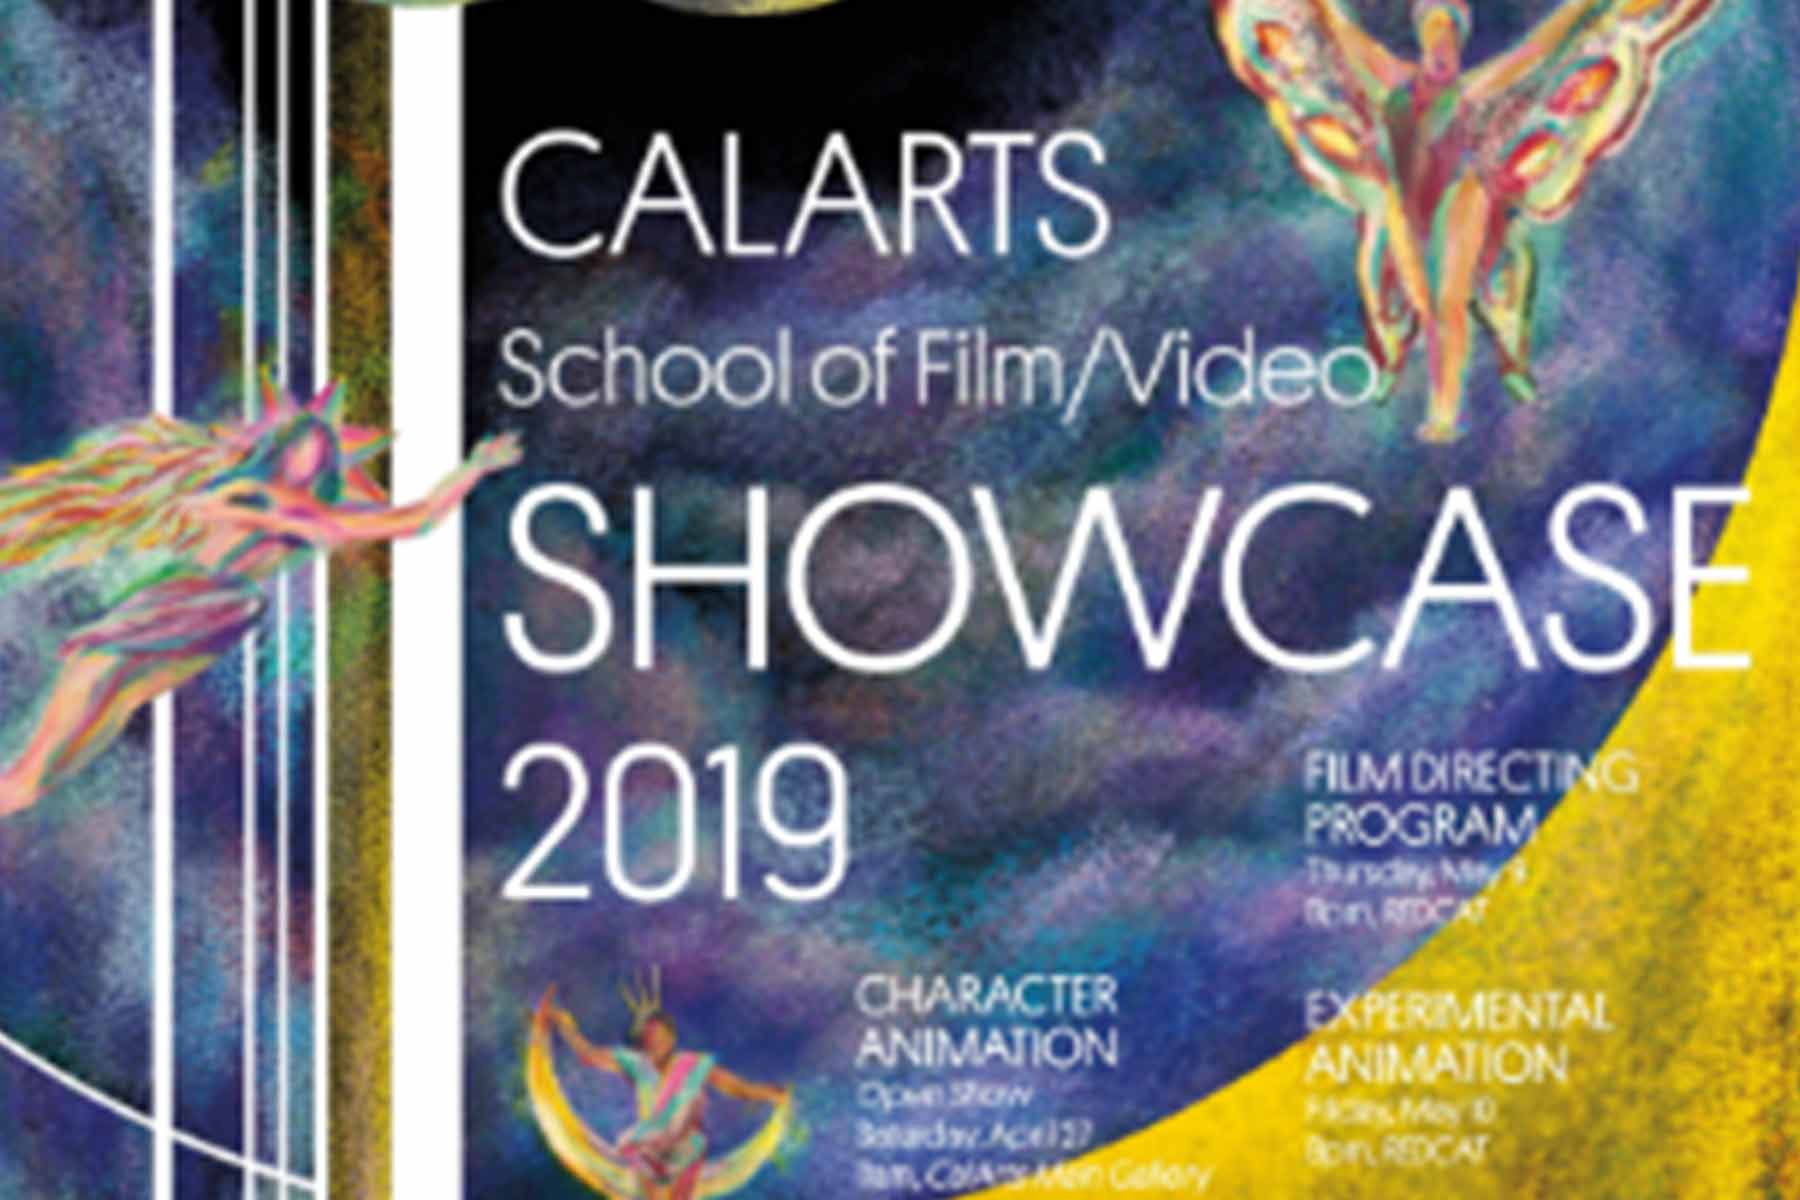 Fresh Out Of Film School — New Directors To Watch From The CalArts School of Film/Video Showcase 2019